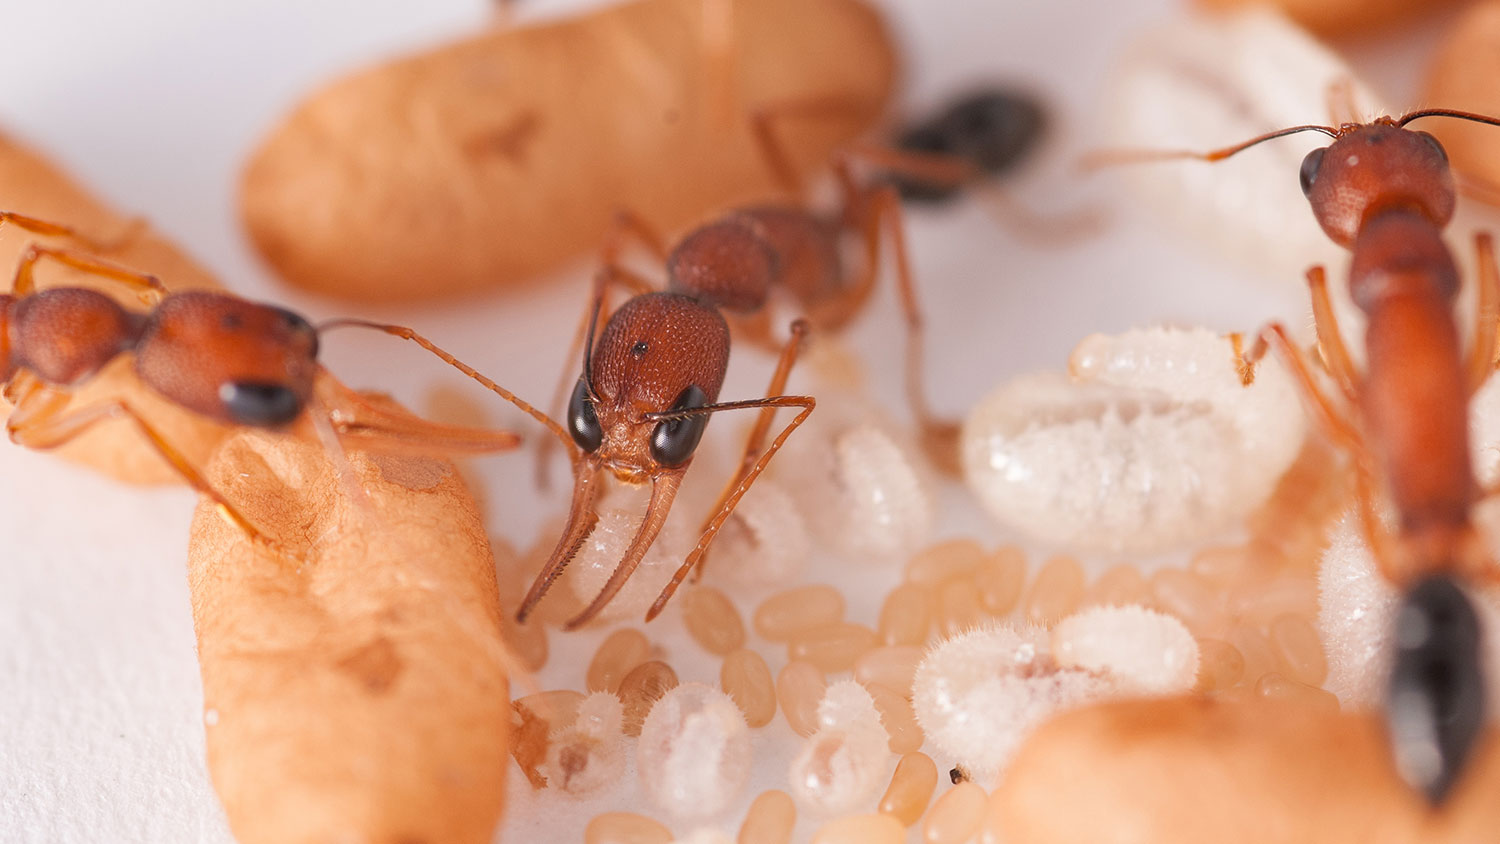 Indian Jumping Ant workers